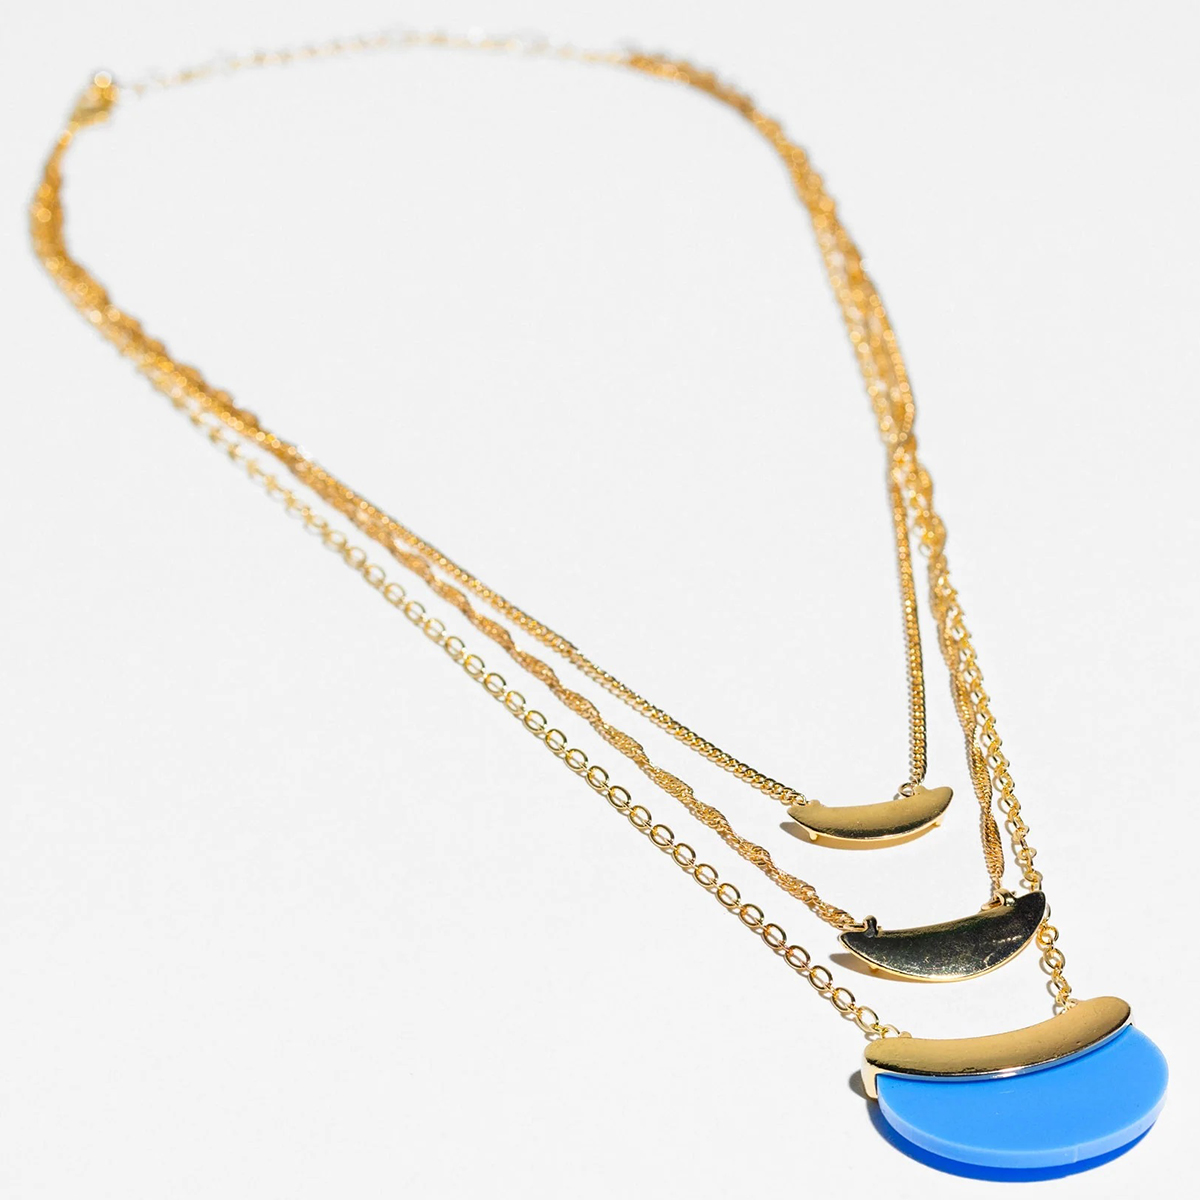 Charming Charlie Blue Resin Necklace, 3 Piece